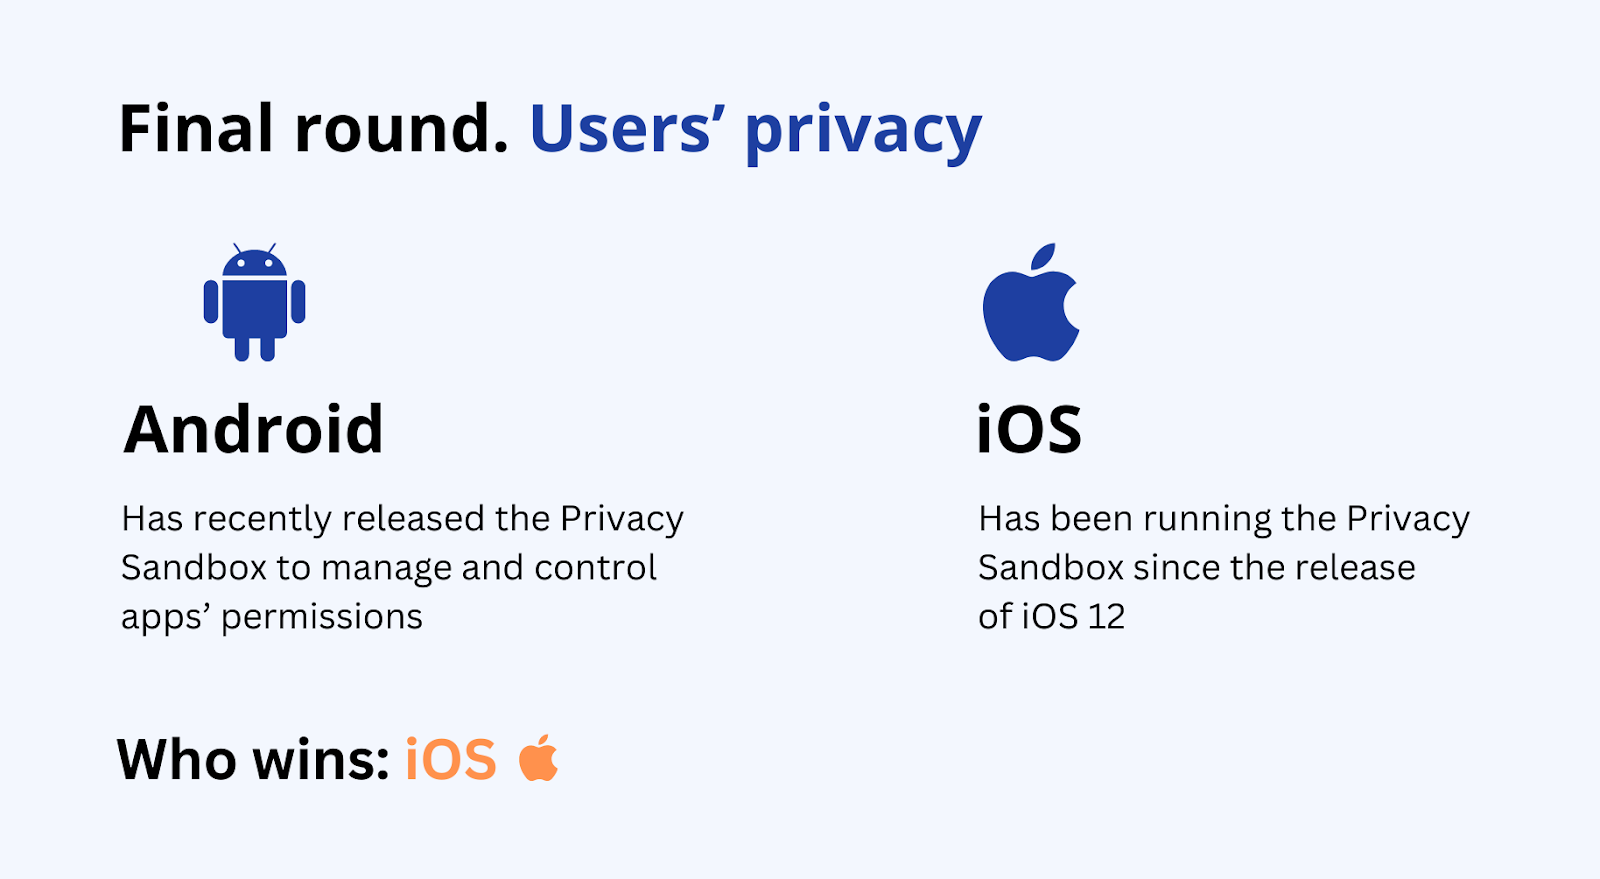 Android vs. iOS: users’ privacy